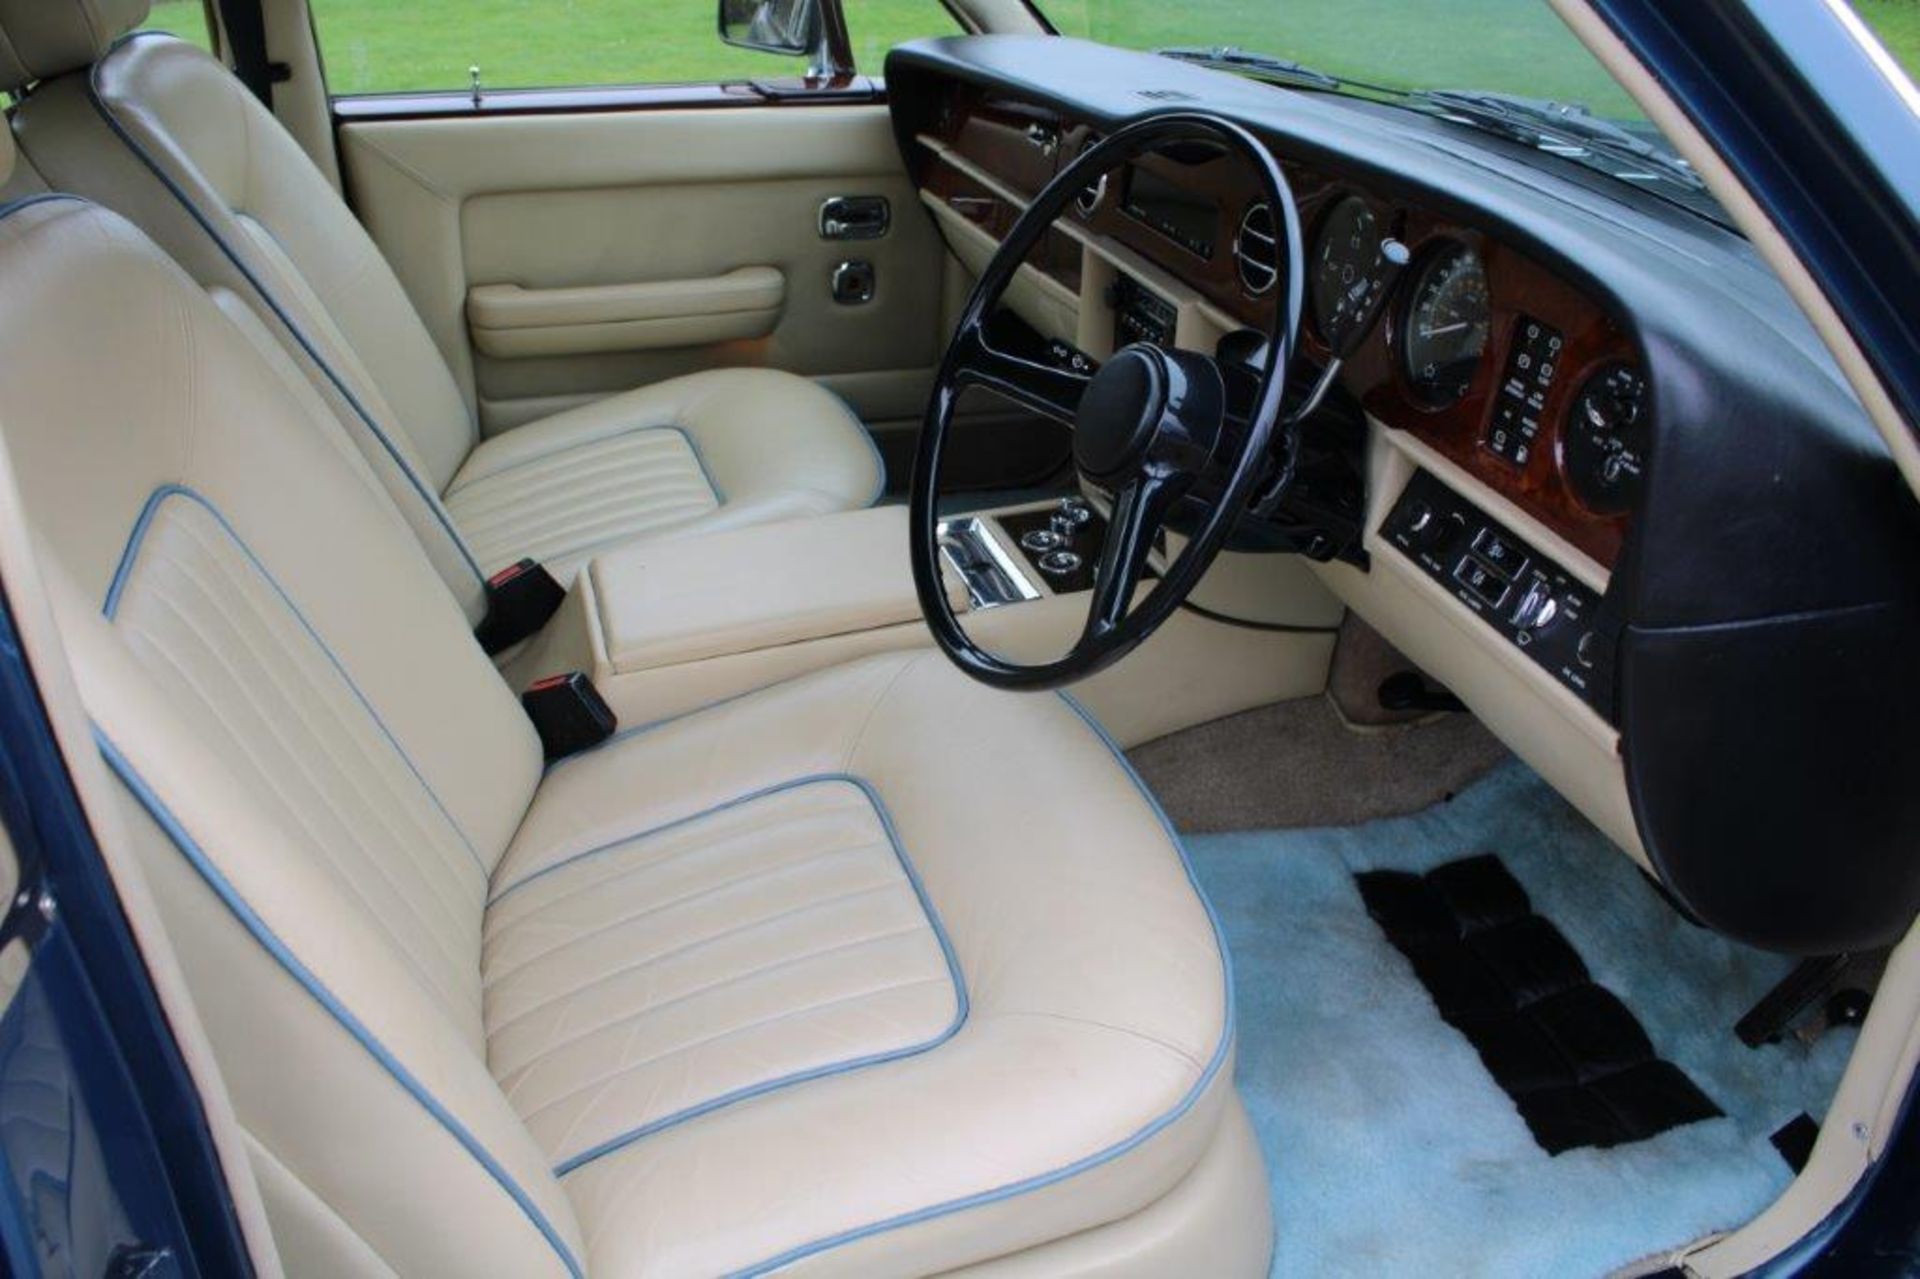 1982 Rolls Royce Silver Spirit 14,666 miles from new - Image 14 of 21